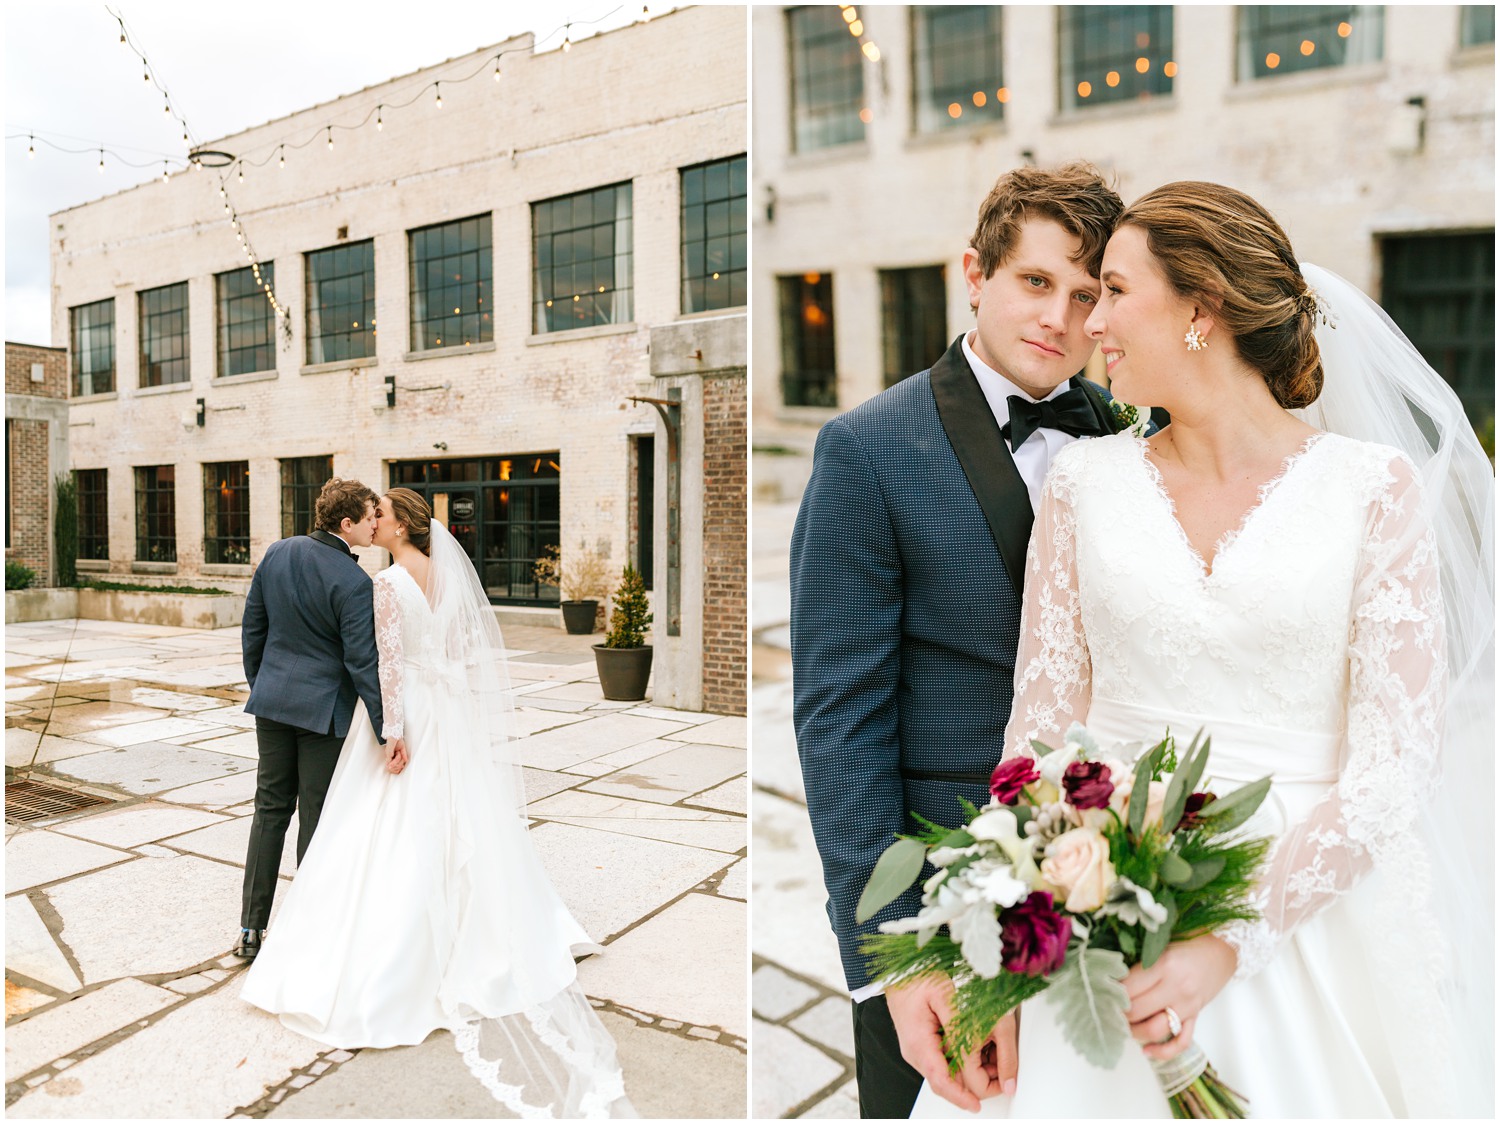 romantic winter wedding portraits of bride and groom in Greensboro NC by Chelsea Renay Photography